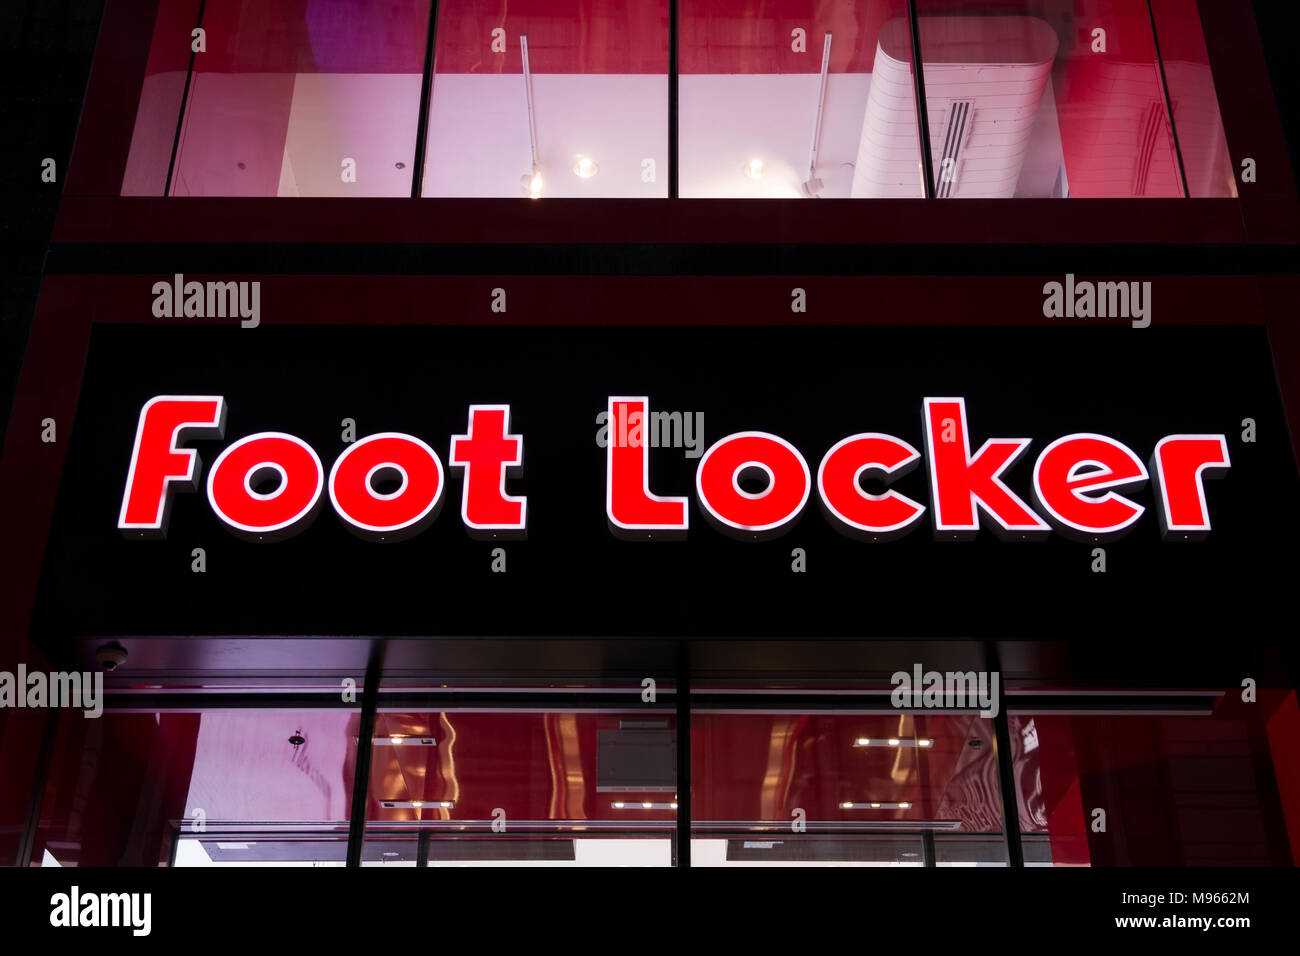 NEW YORK, USA - AUGUST 31, 2017: Detail of Foot Locker store in New York. It is an American sportswear and footwear retailer founded at 1974. Stock Photo